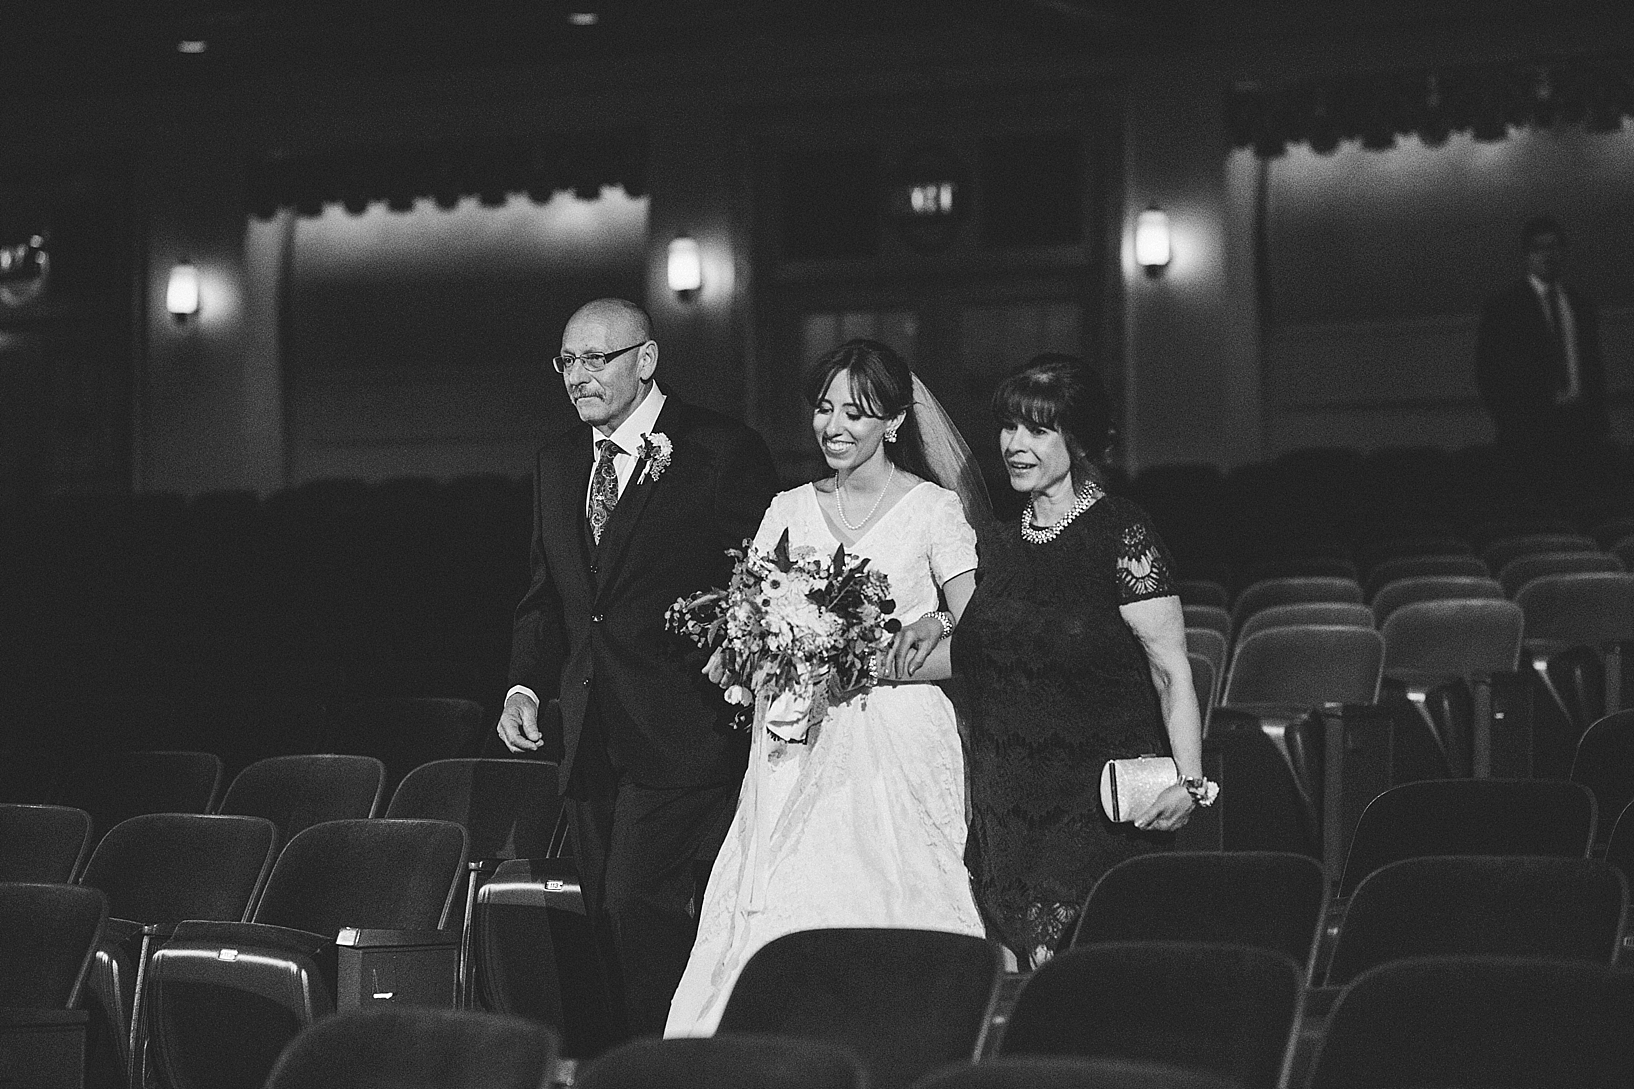 wedding ceremony at Powers Auditorium Youngstown OH